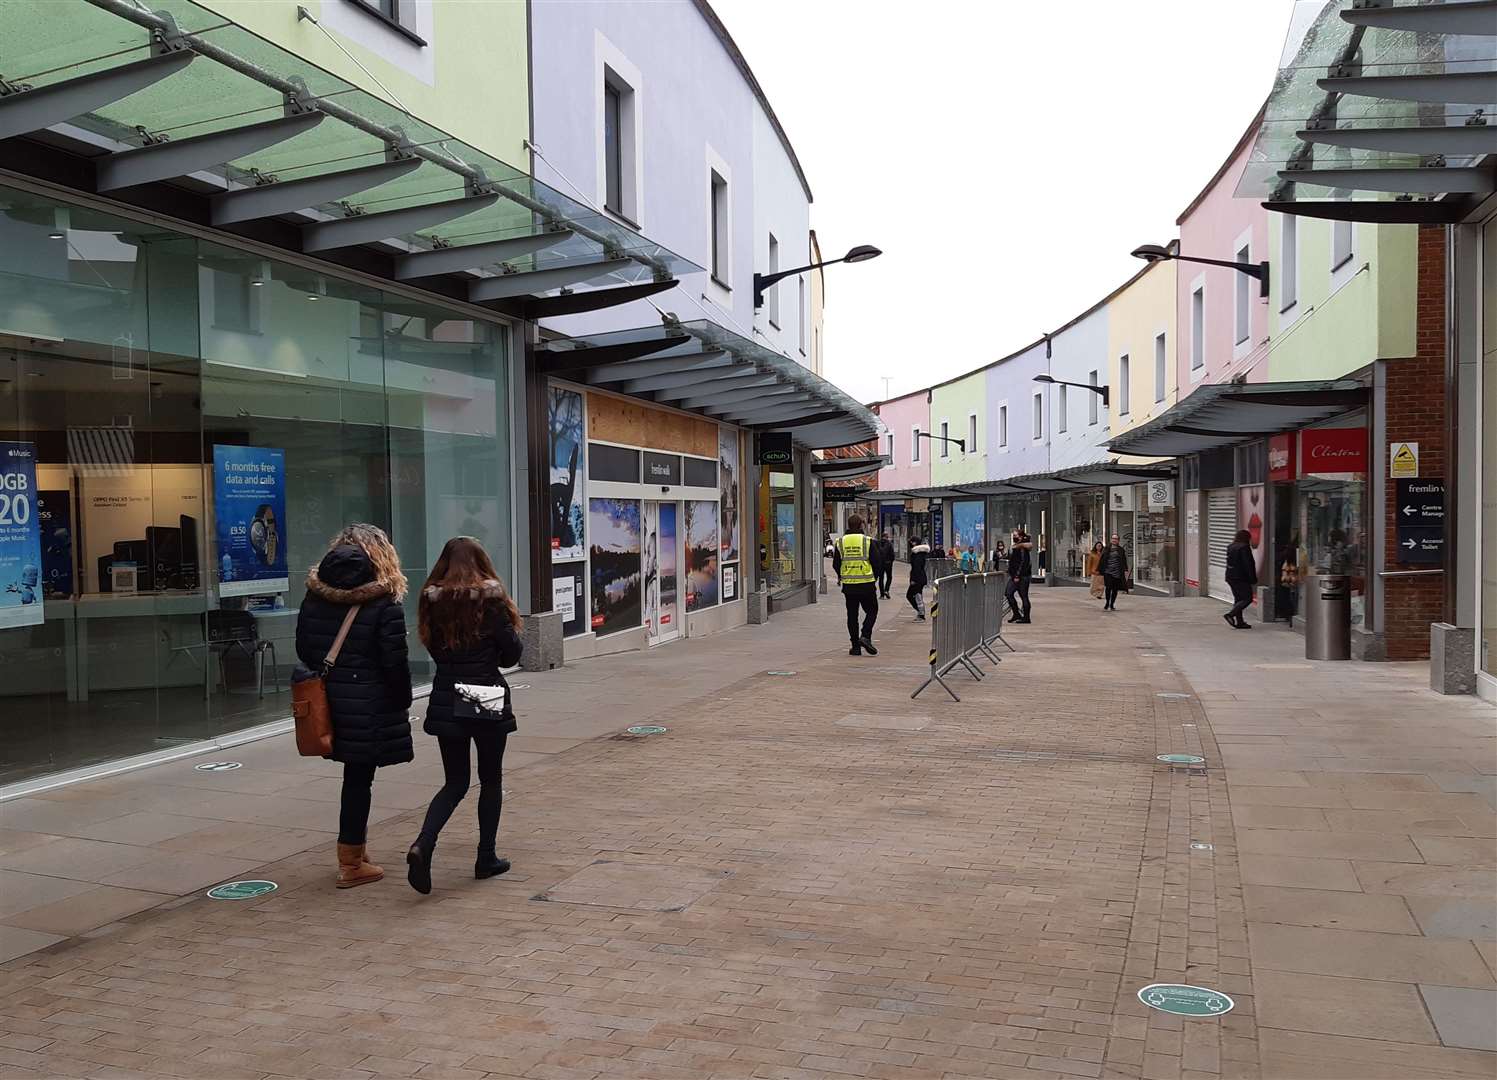 The Fremlin Walk area, Maidstone, where an officer was allegedly spat at